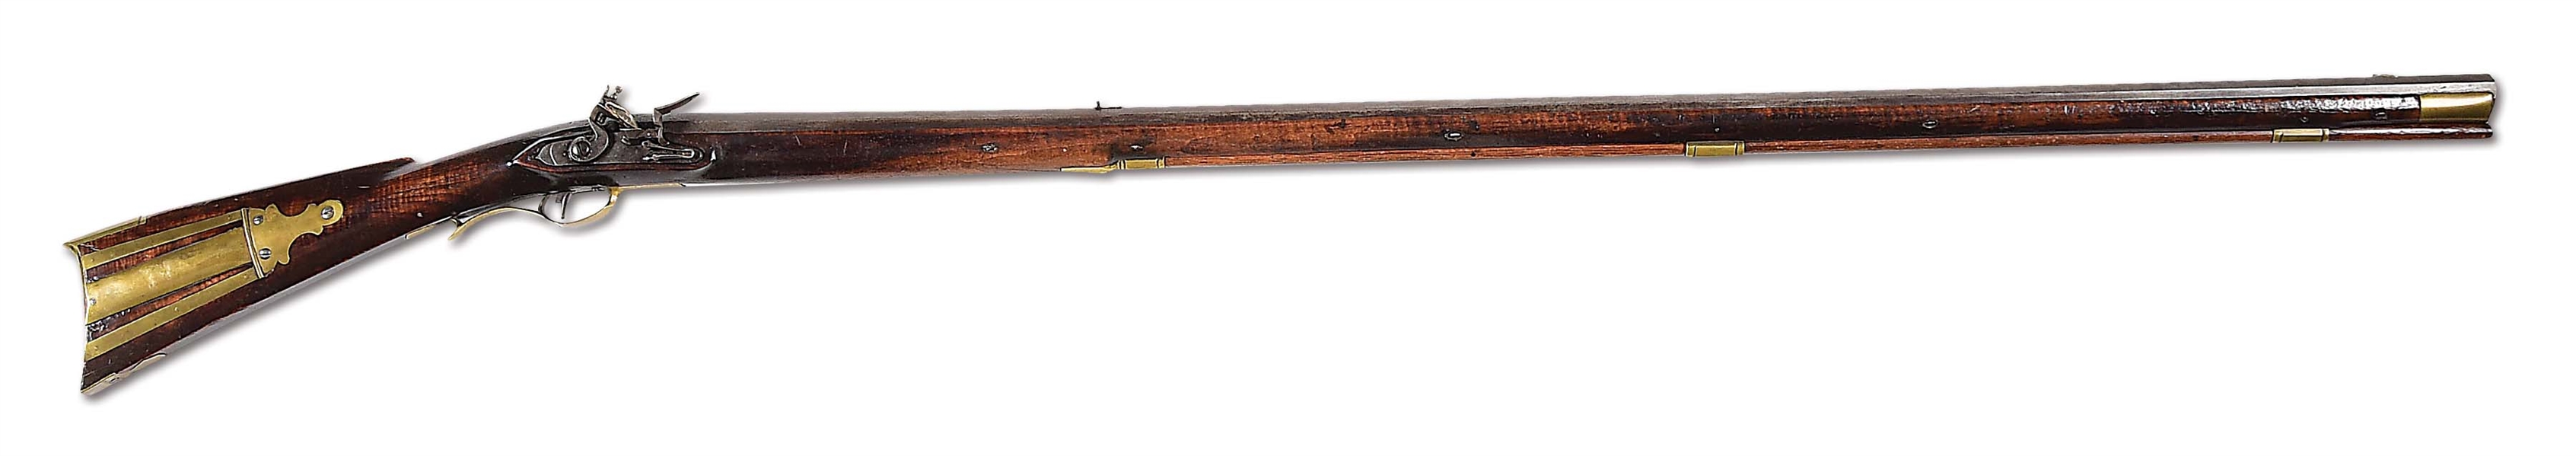 (A) WILLIAM HENRY MARKED KENTUCKY RIFLE.